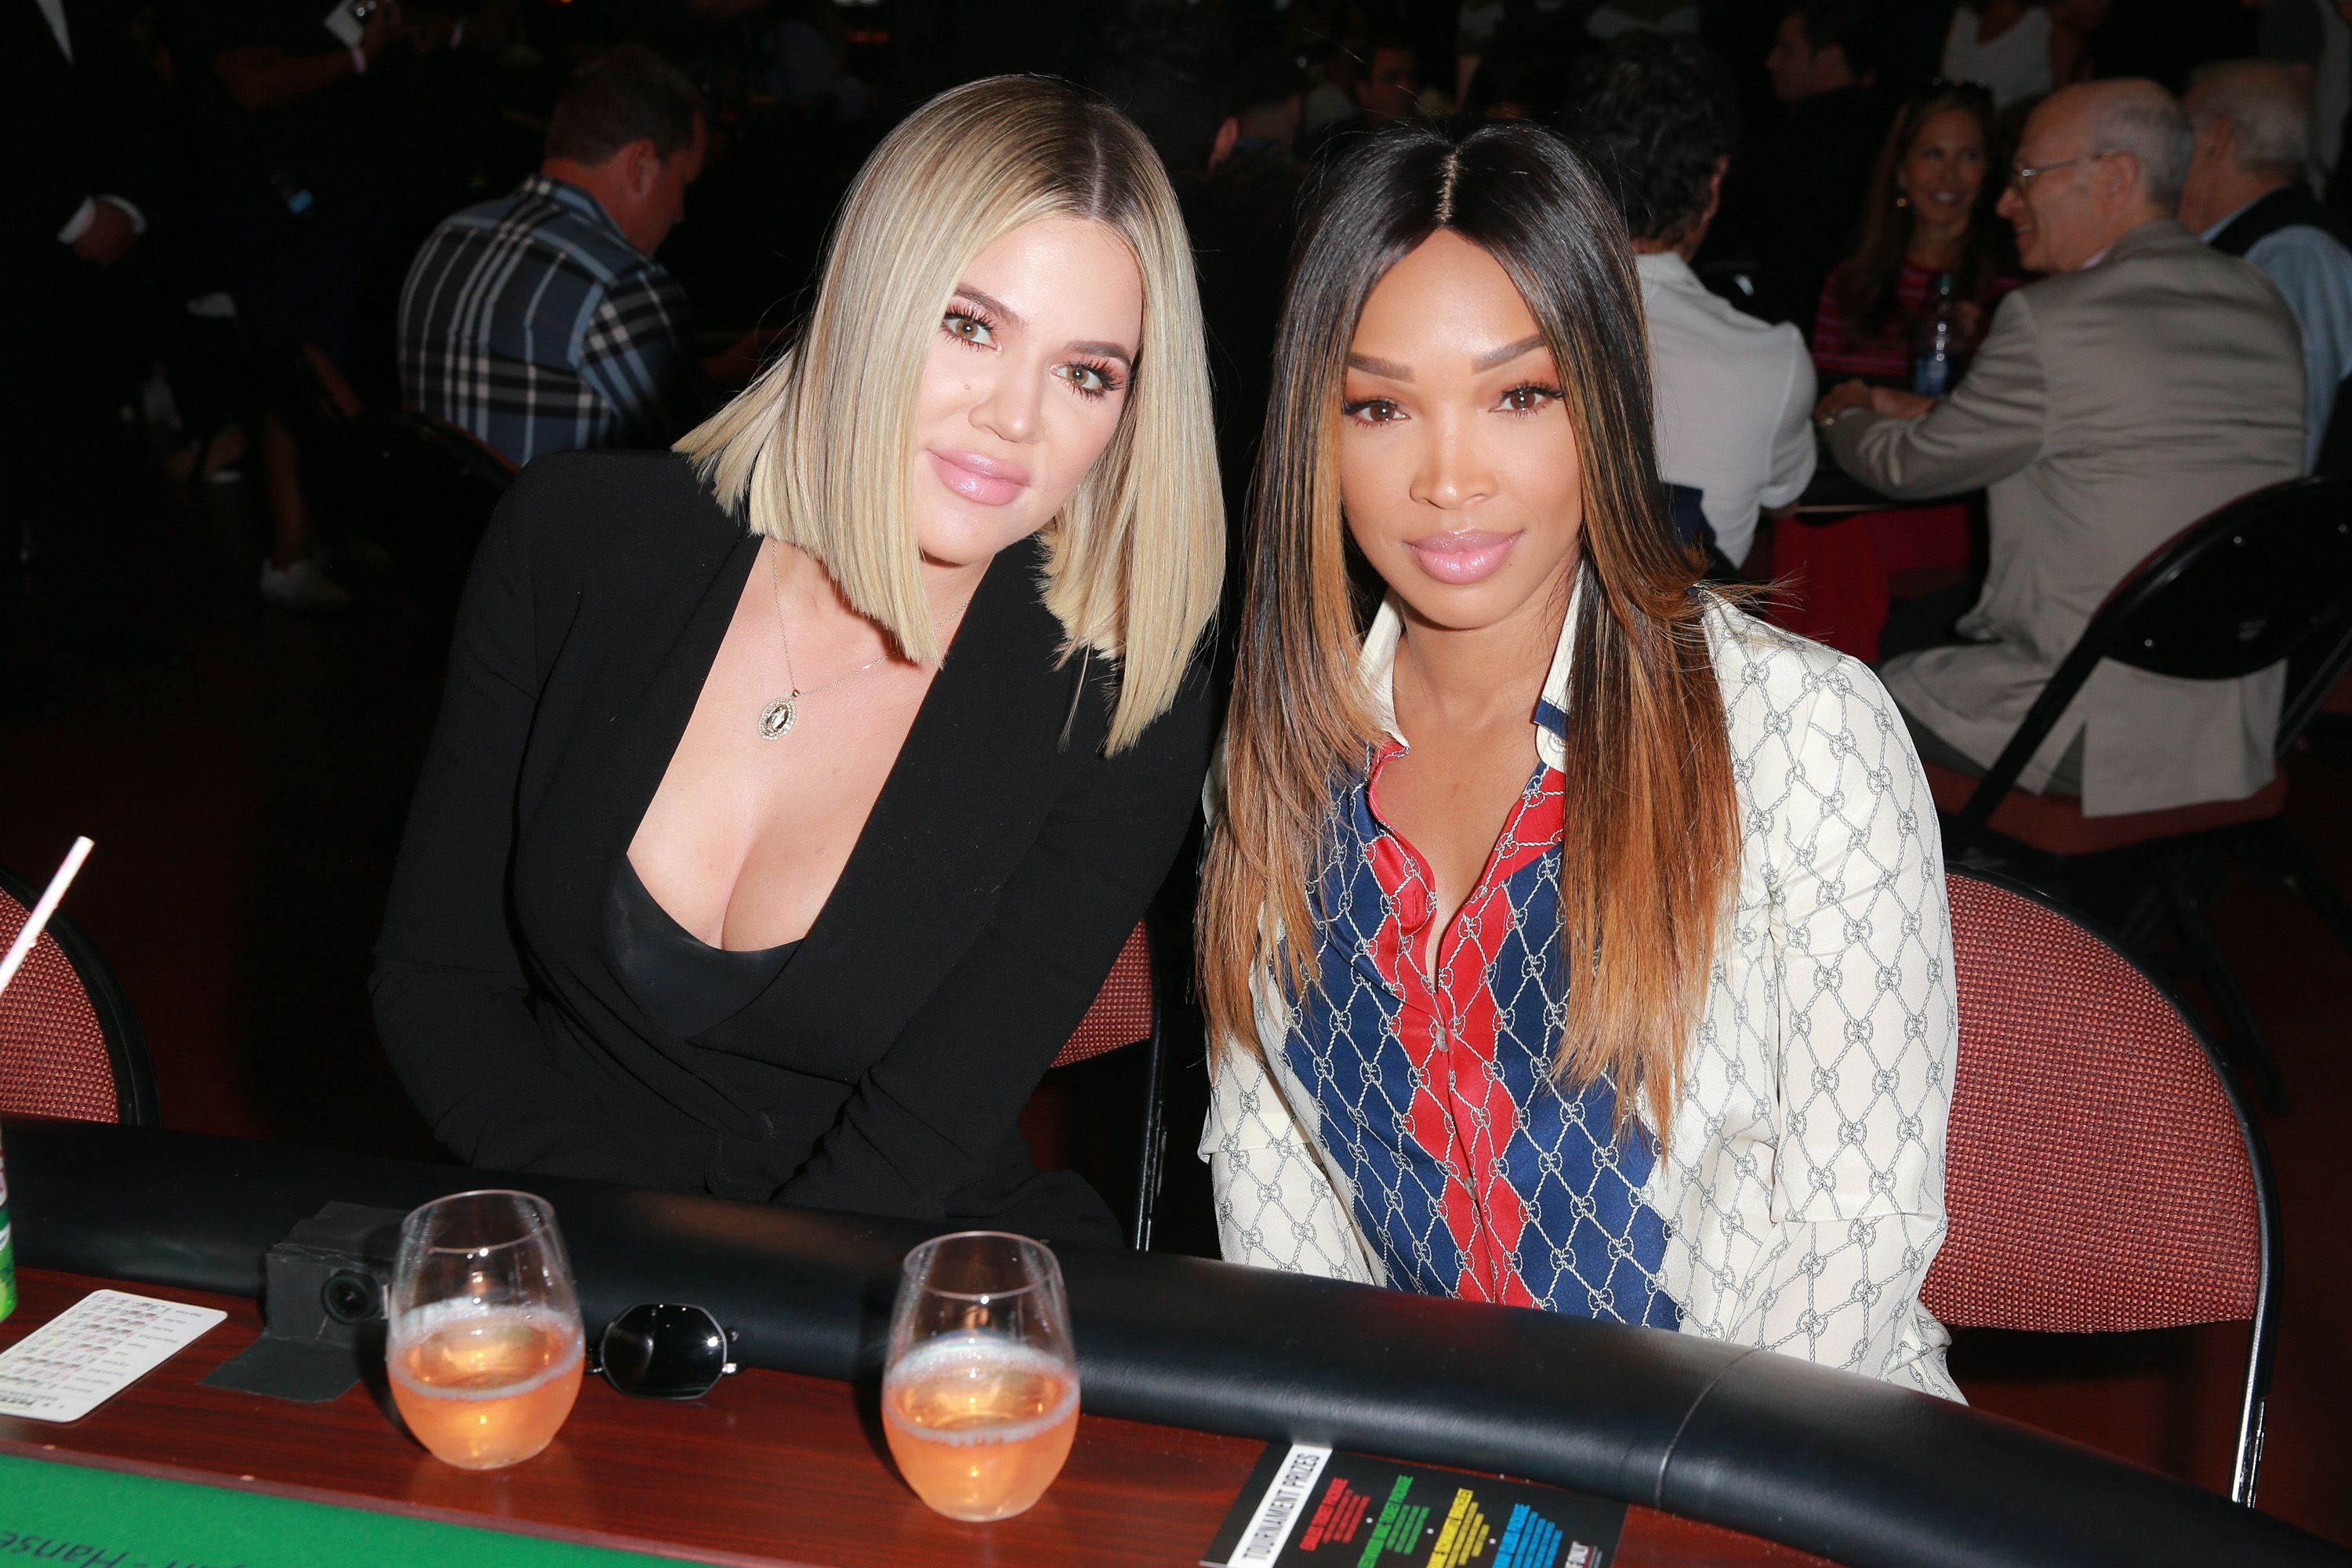 Khloé Kardashian and Malika Haqq during the first annual "If Only" Texas Hold'em charity poker tournament on July 29, 2018 in California. | Source: Getty Images